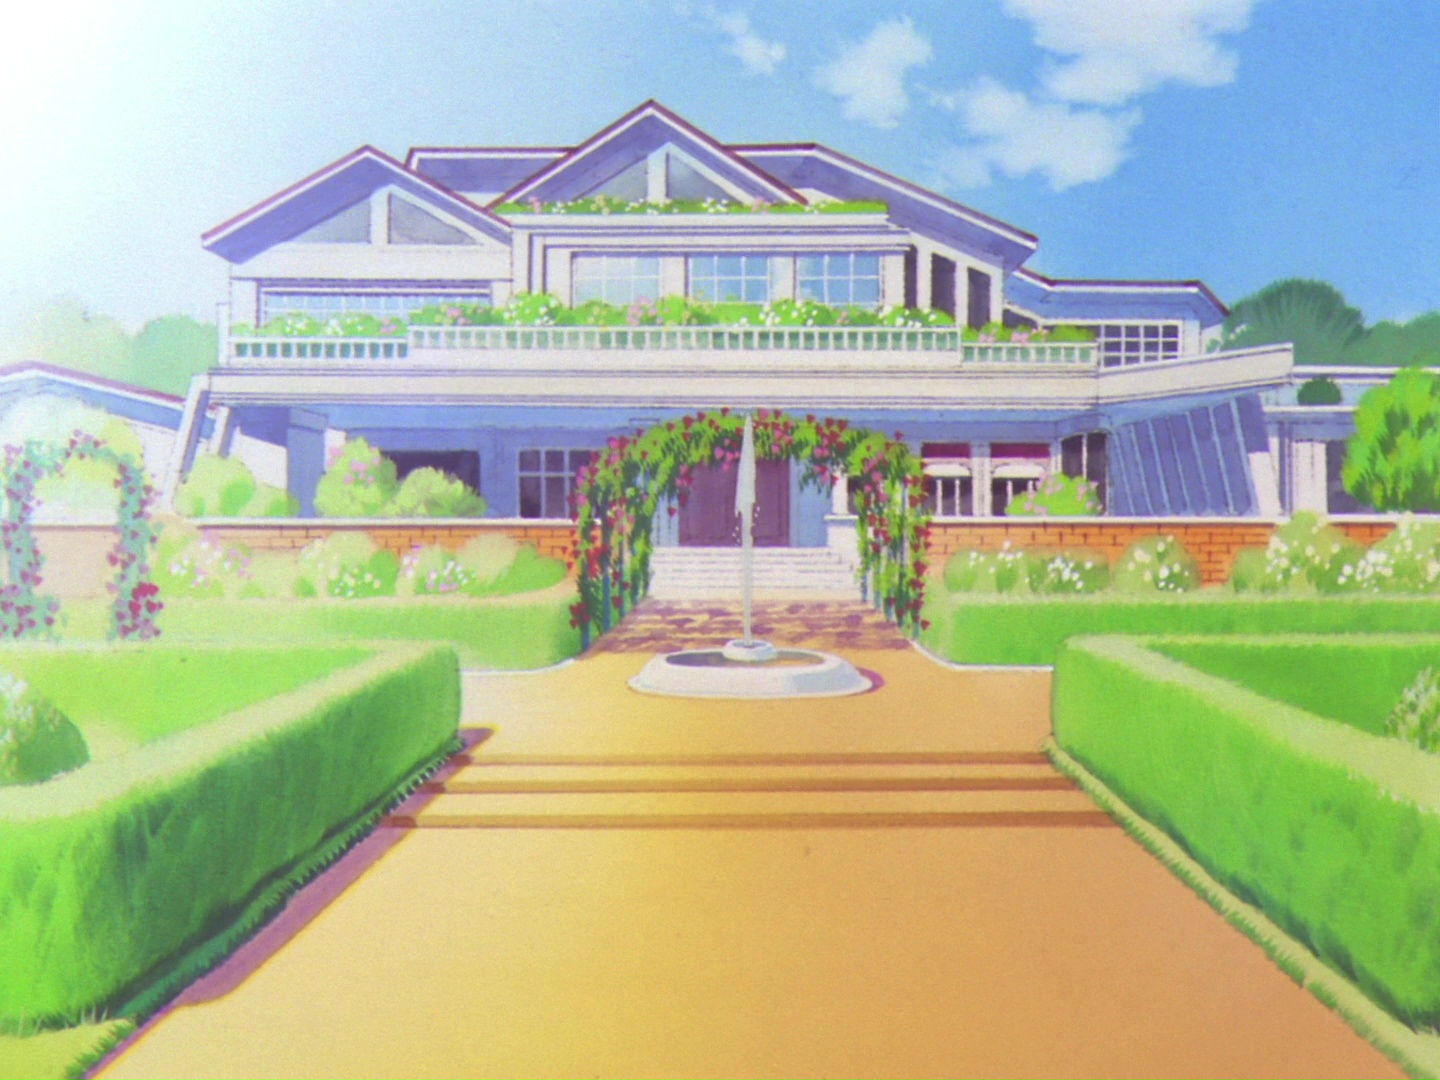 Anime Mansion - Anime Mansion updated their cover photo.